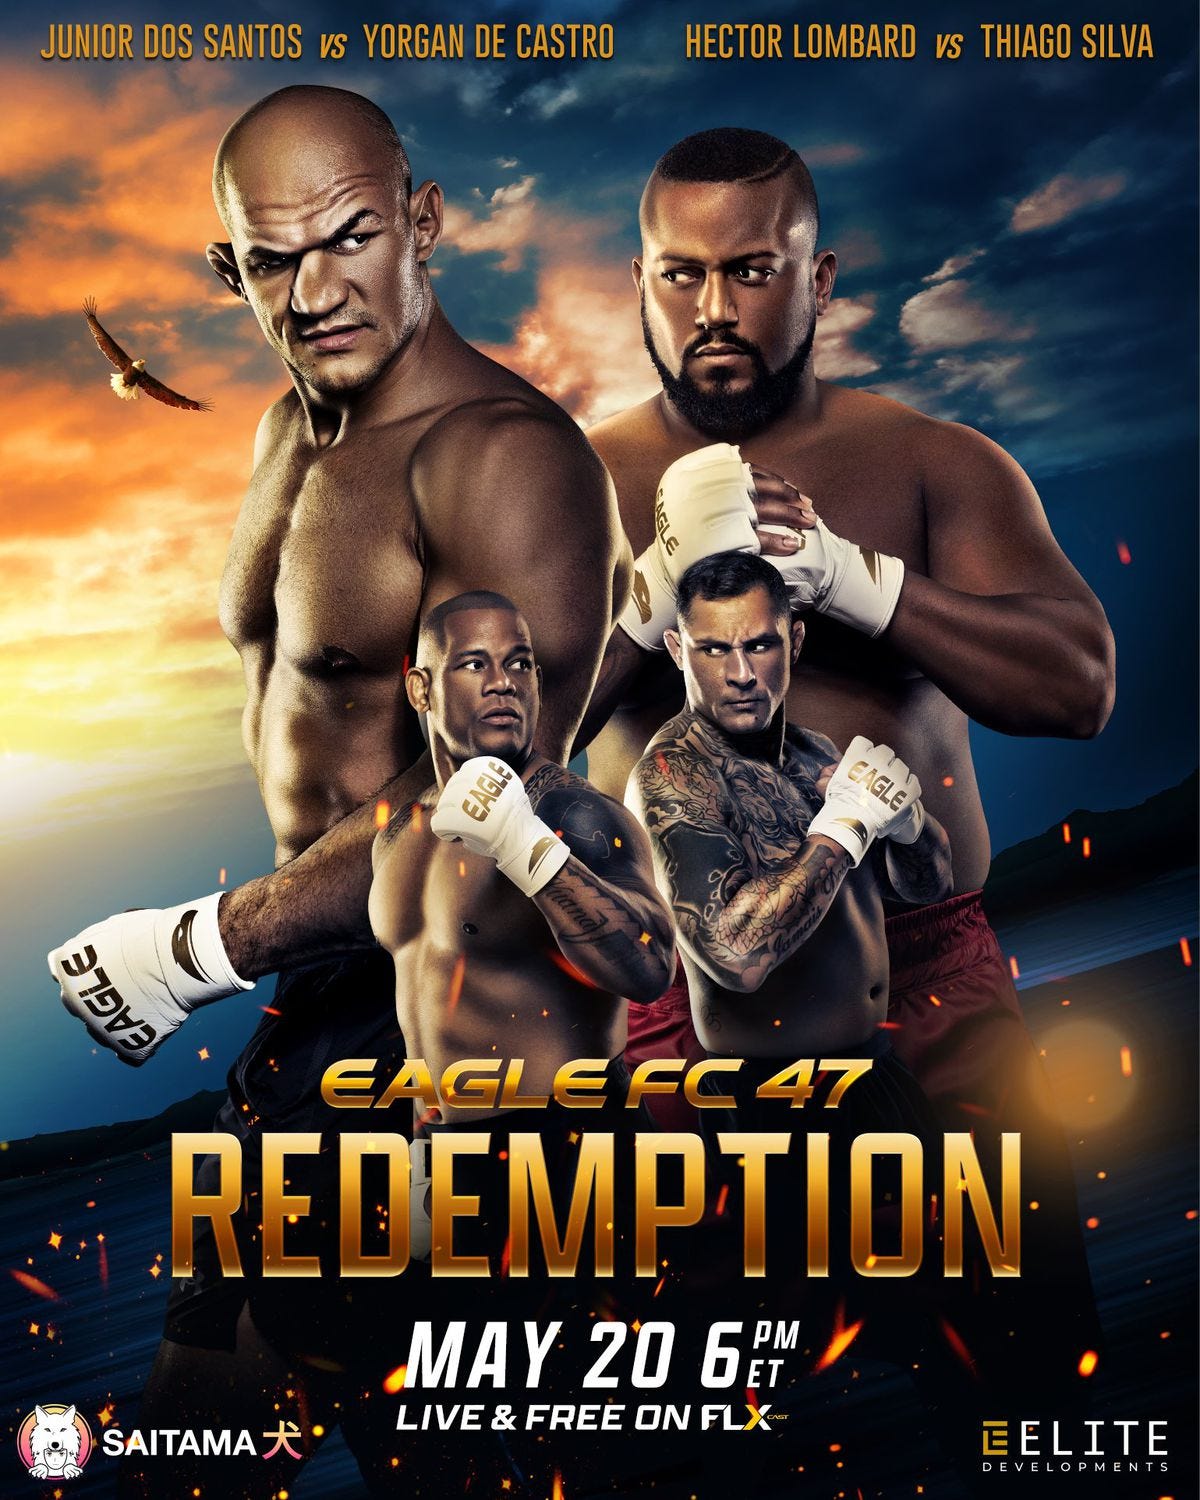 Pic: Junior dos Santos scores 'Redemption' in Eagle FC poster for May 20  return - MMAmania.com